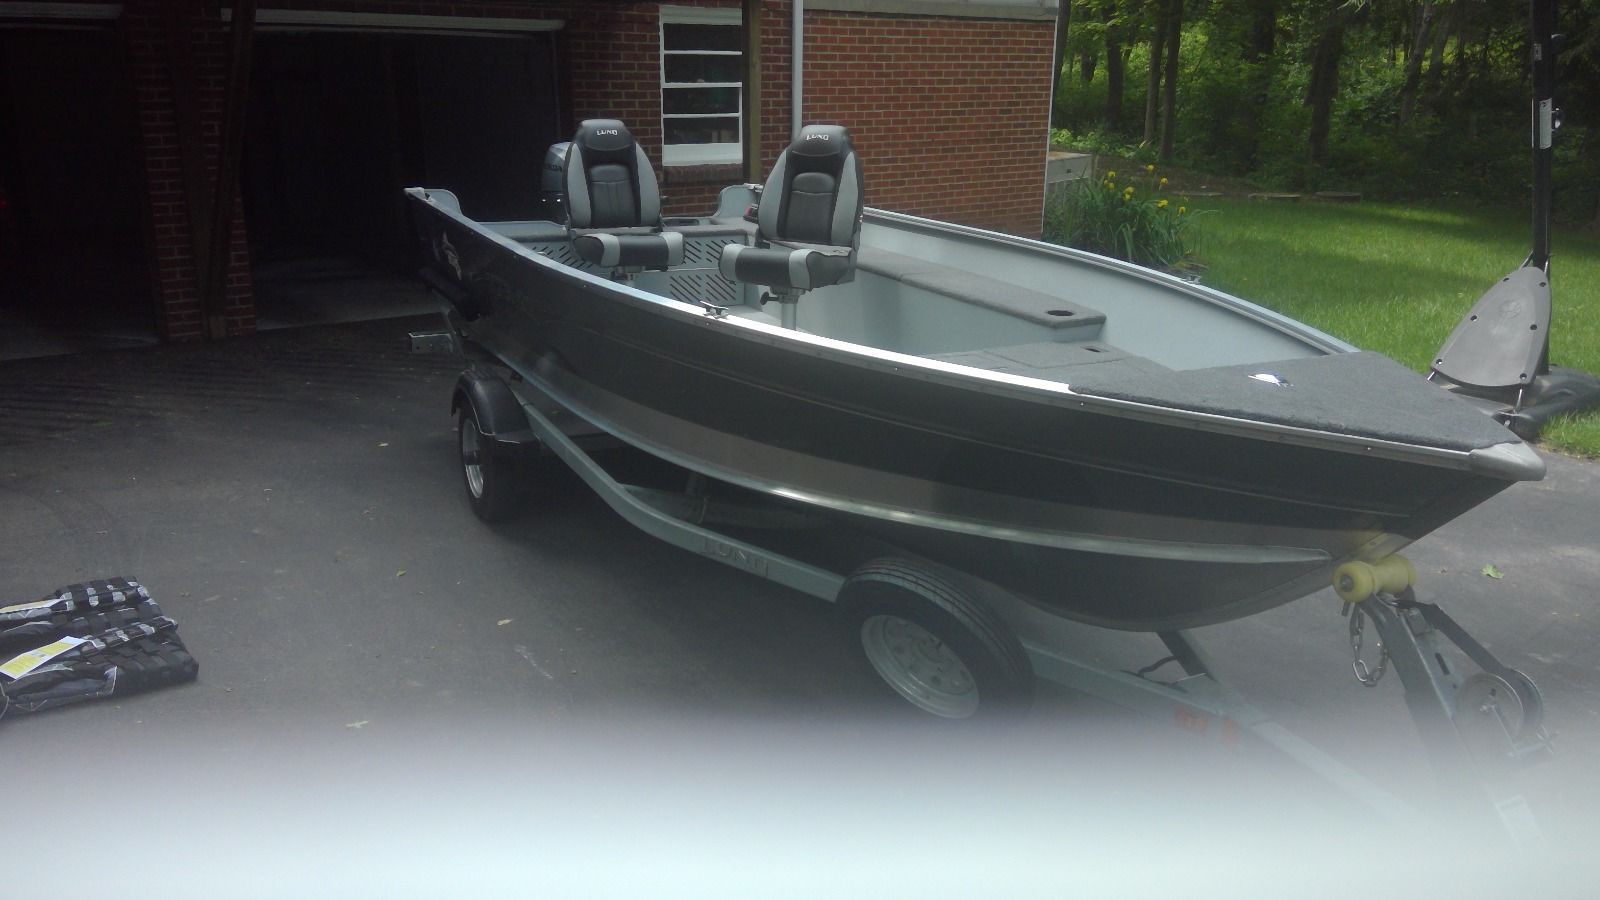 lund rebel 1600 2016 for sale for $12,500 - boats-from-usa.com